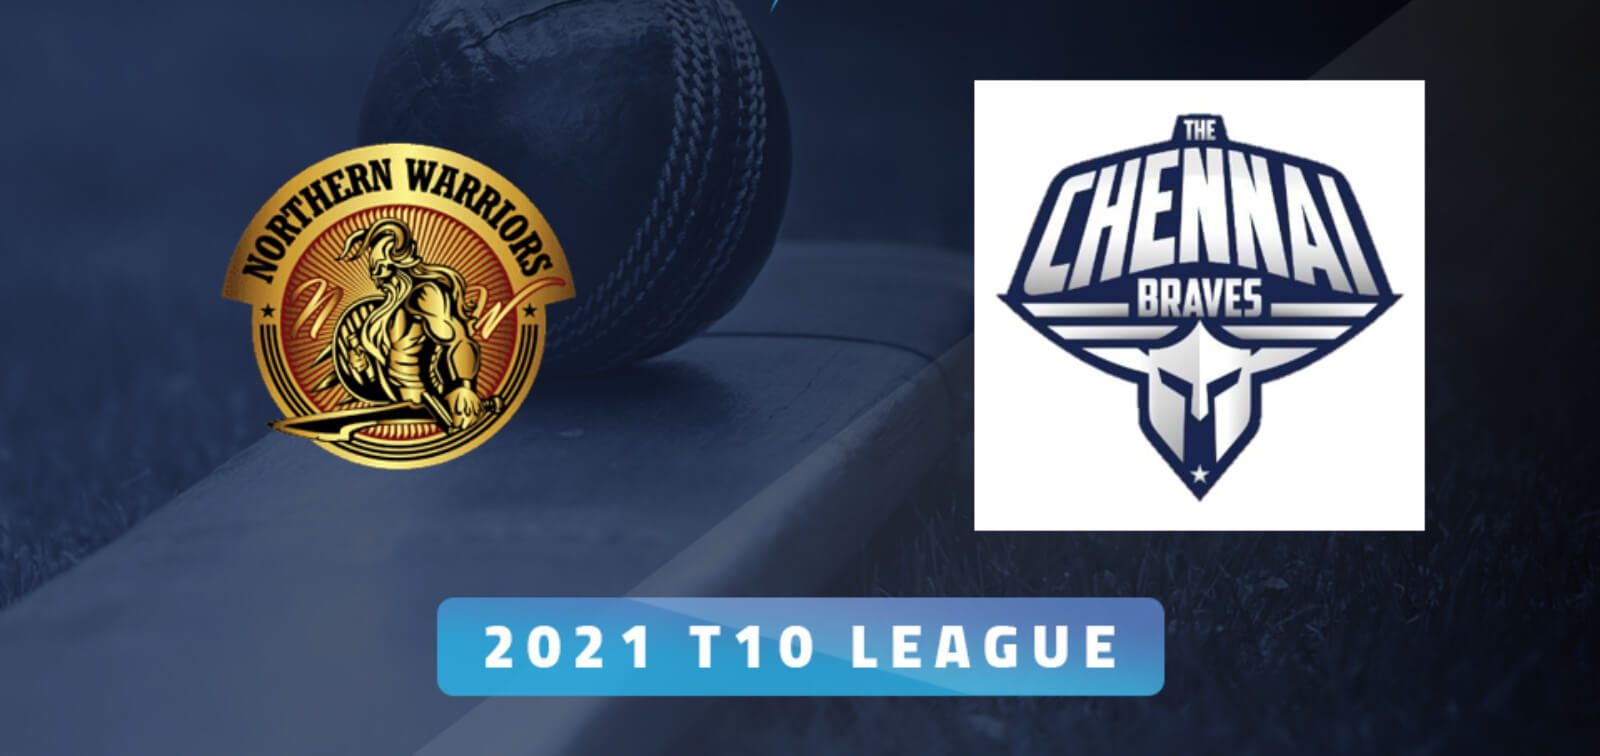 Abu Dhabi T10 LIVE: Preview, Squad News, Head to Head stats and Dream11 Prediction for The Chennai Braves vs Northern Warriors - Match 14